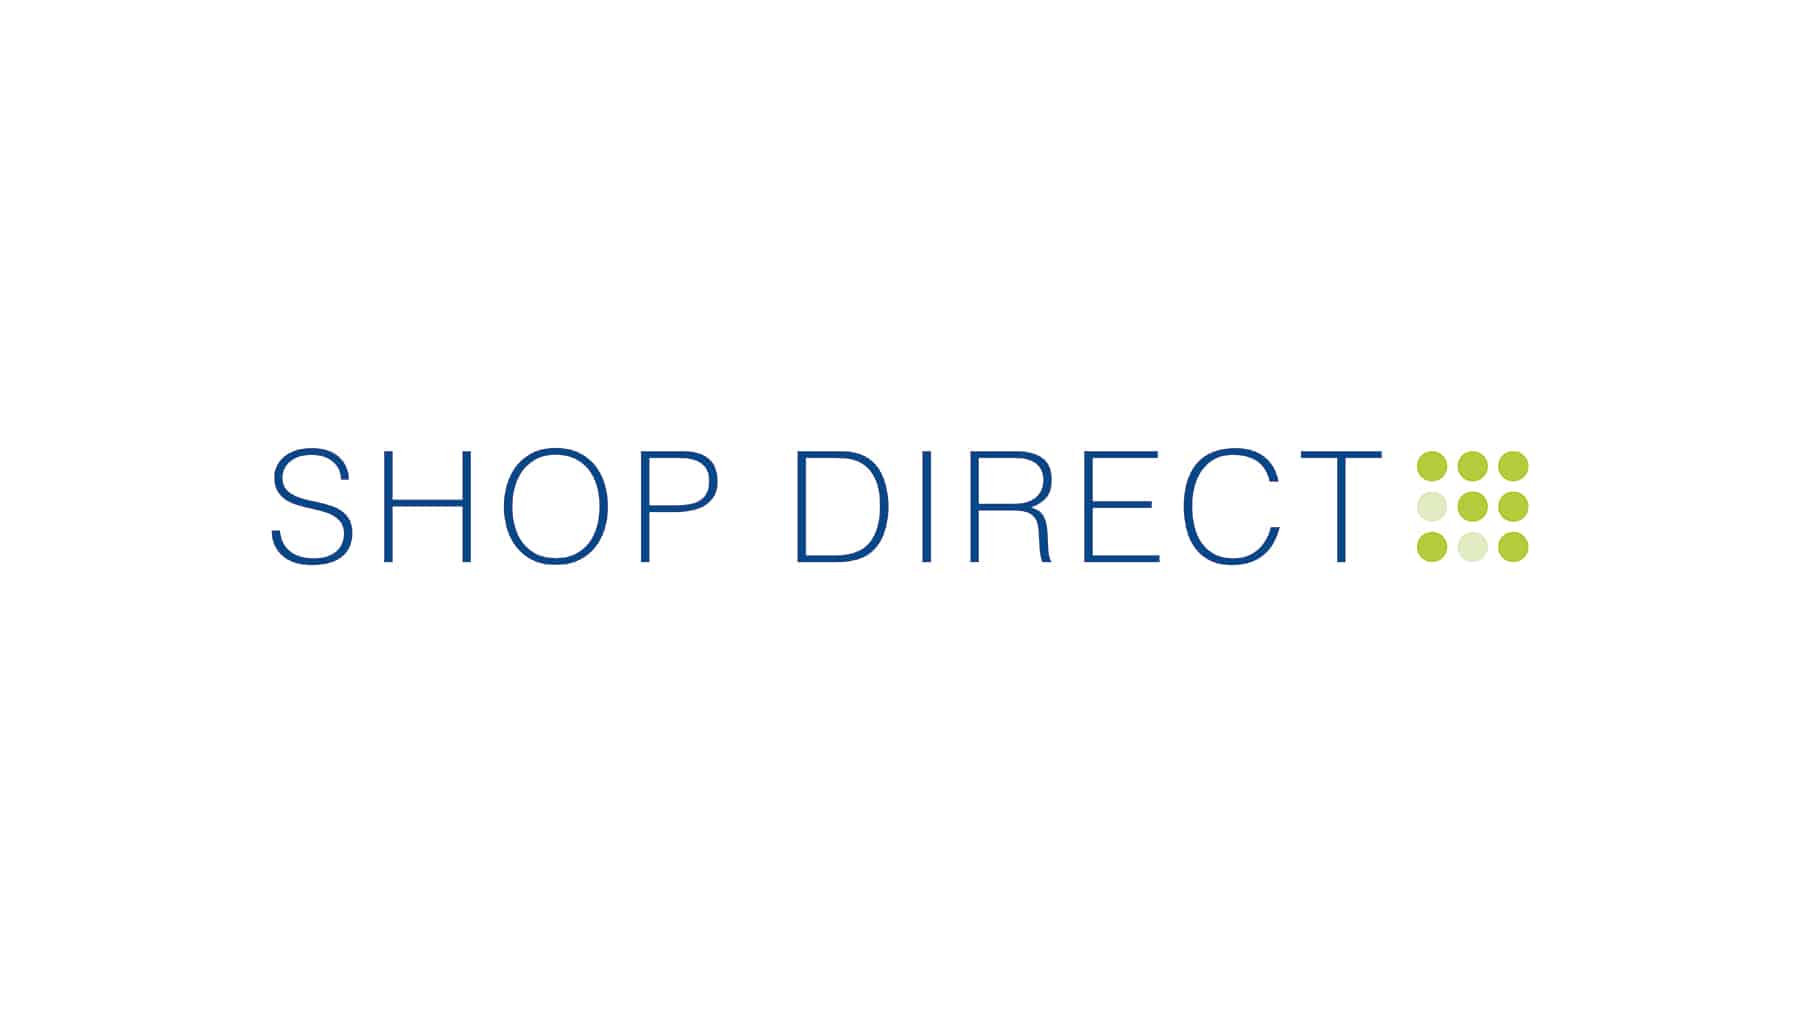 Shop Direct consolidates brands